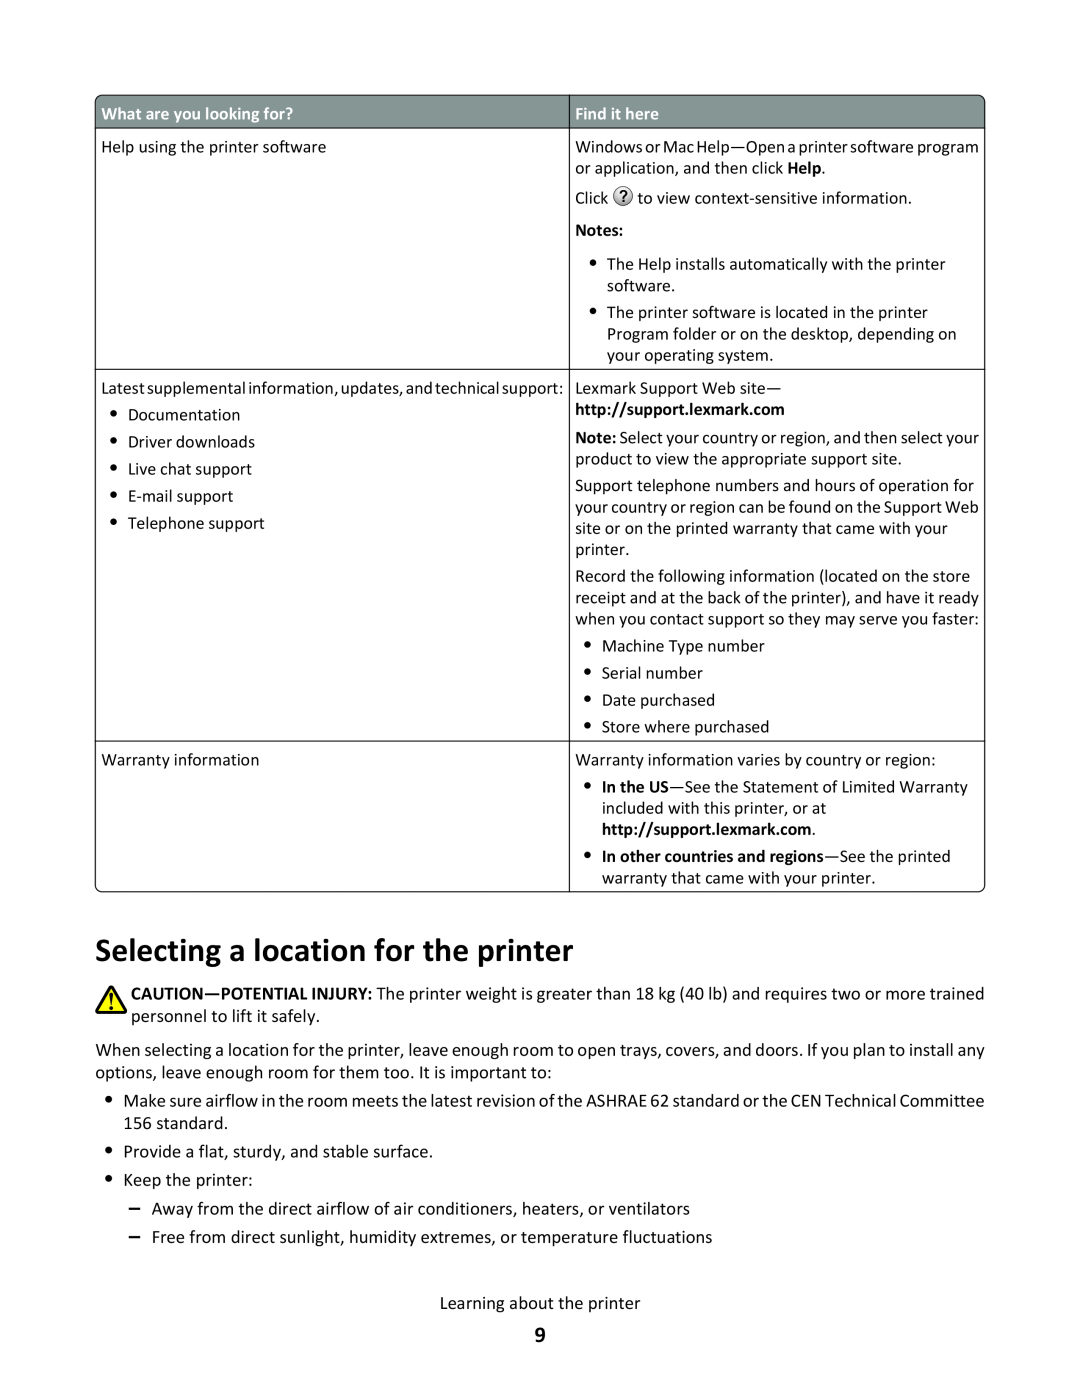 Lexmark C790 manual Selecting a location for the printer 